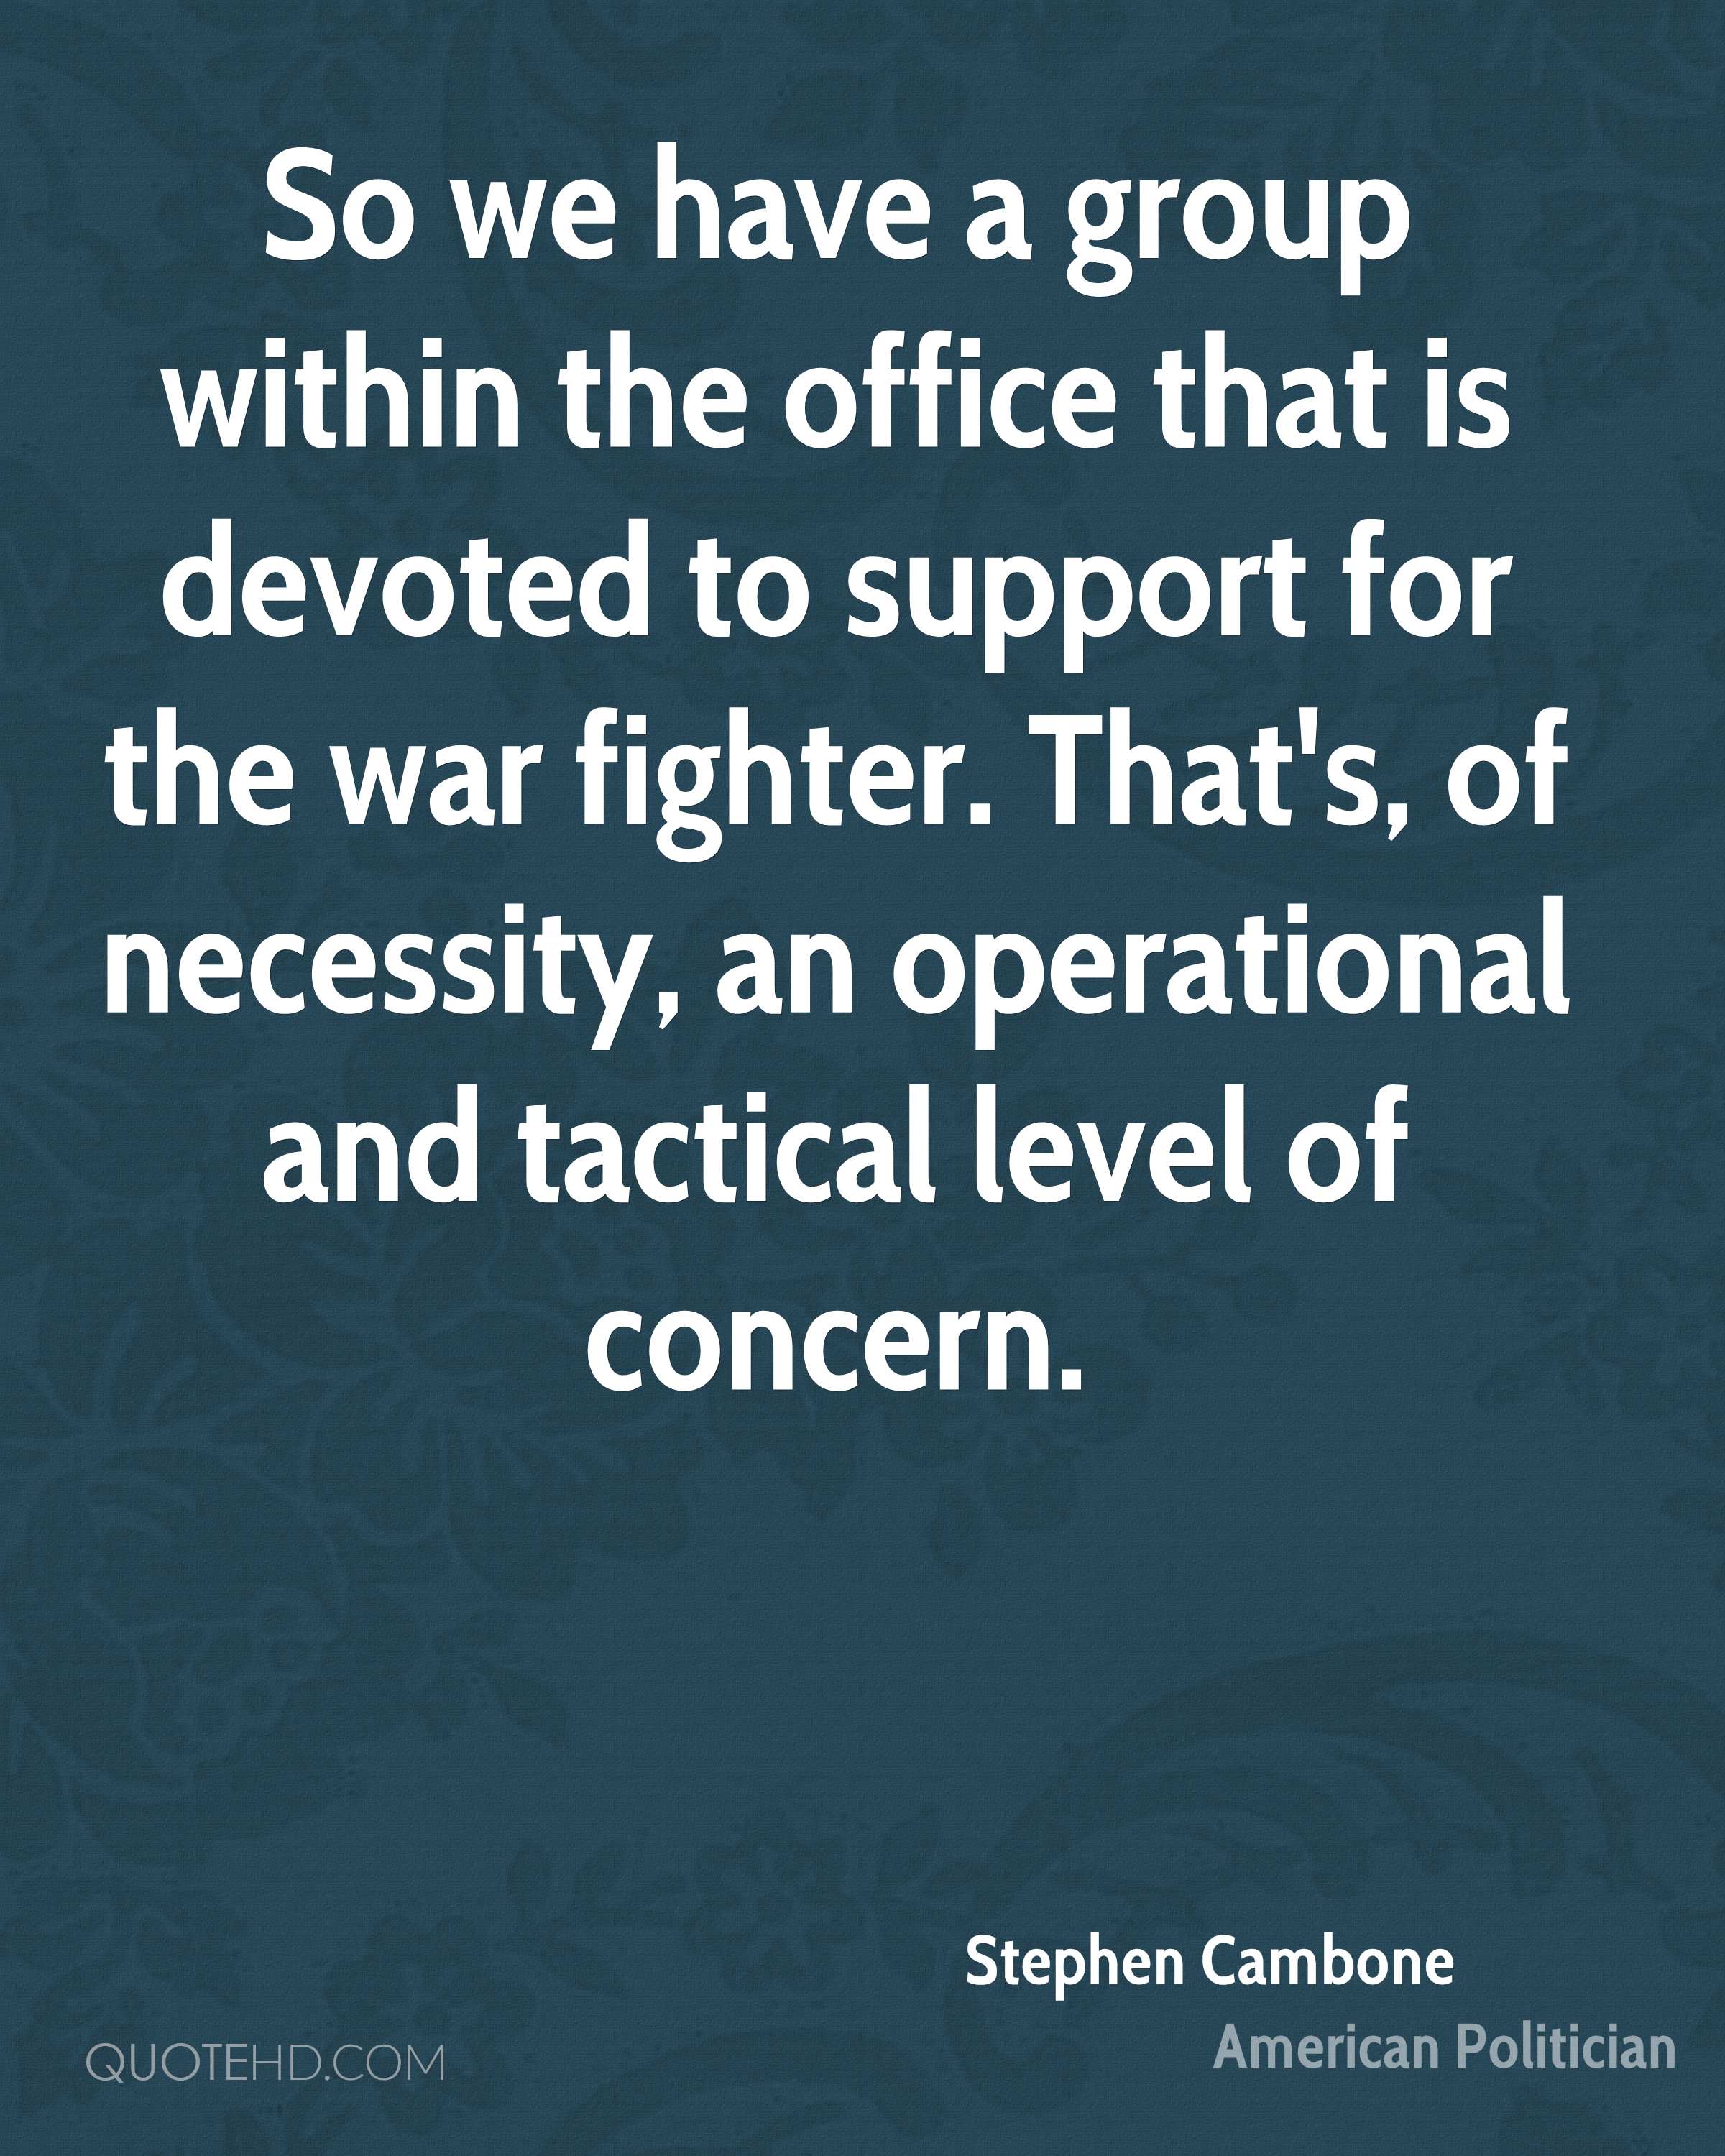 So we have a group within the office that is devoted to support for the war fighter. That’s, of … level of concern. Stephen Cambone